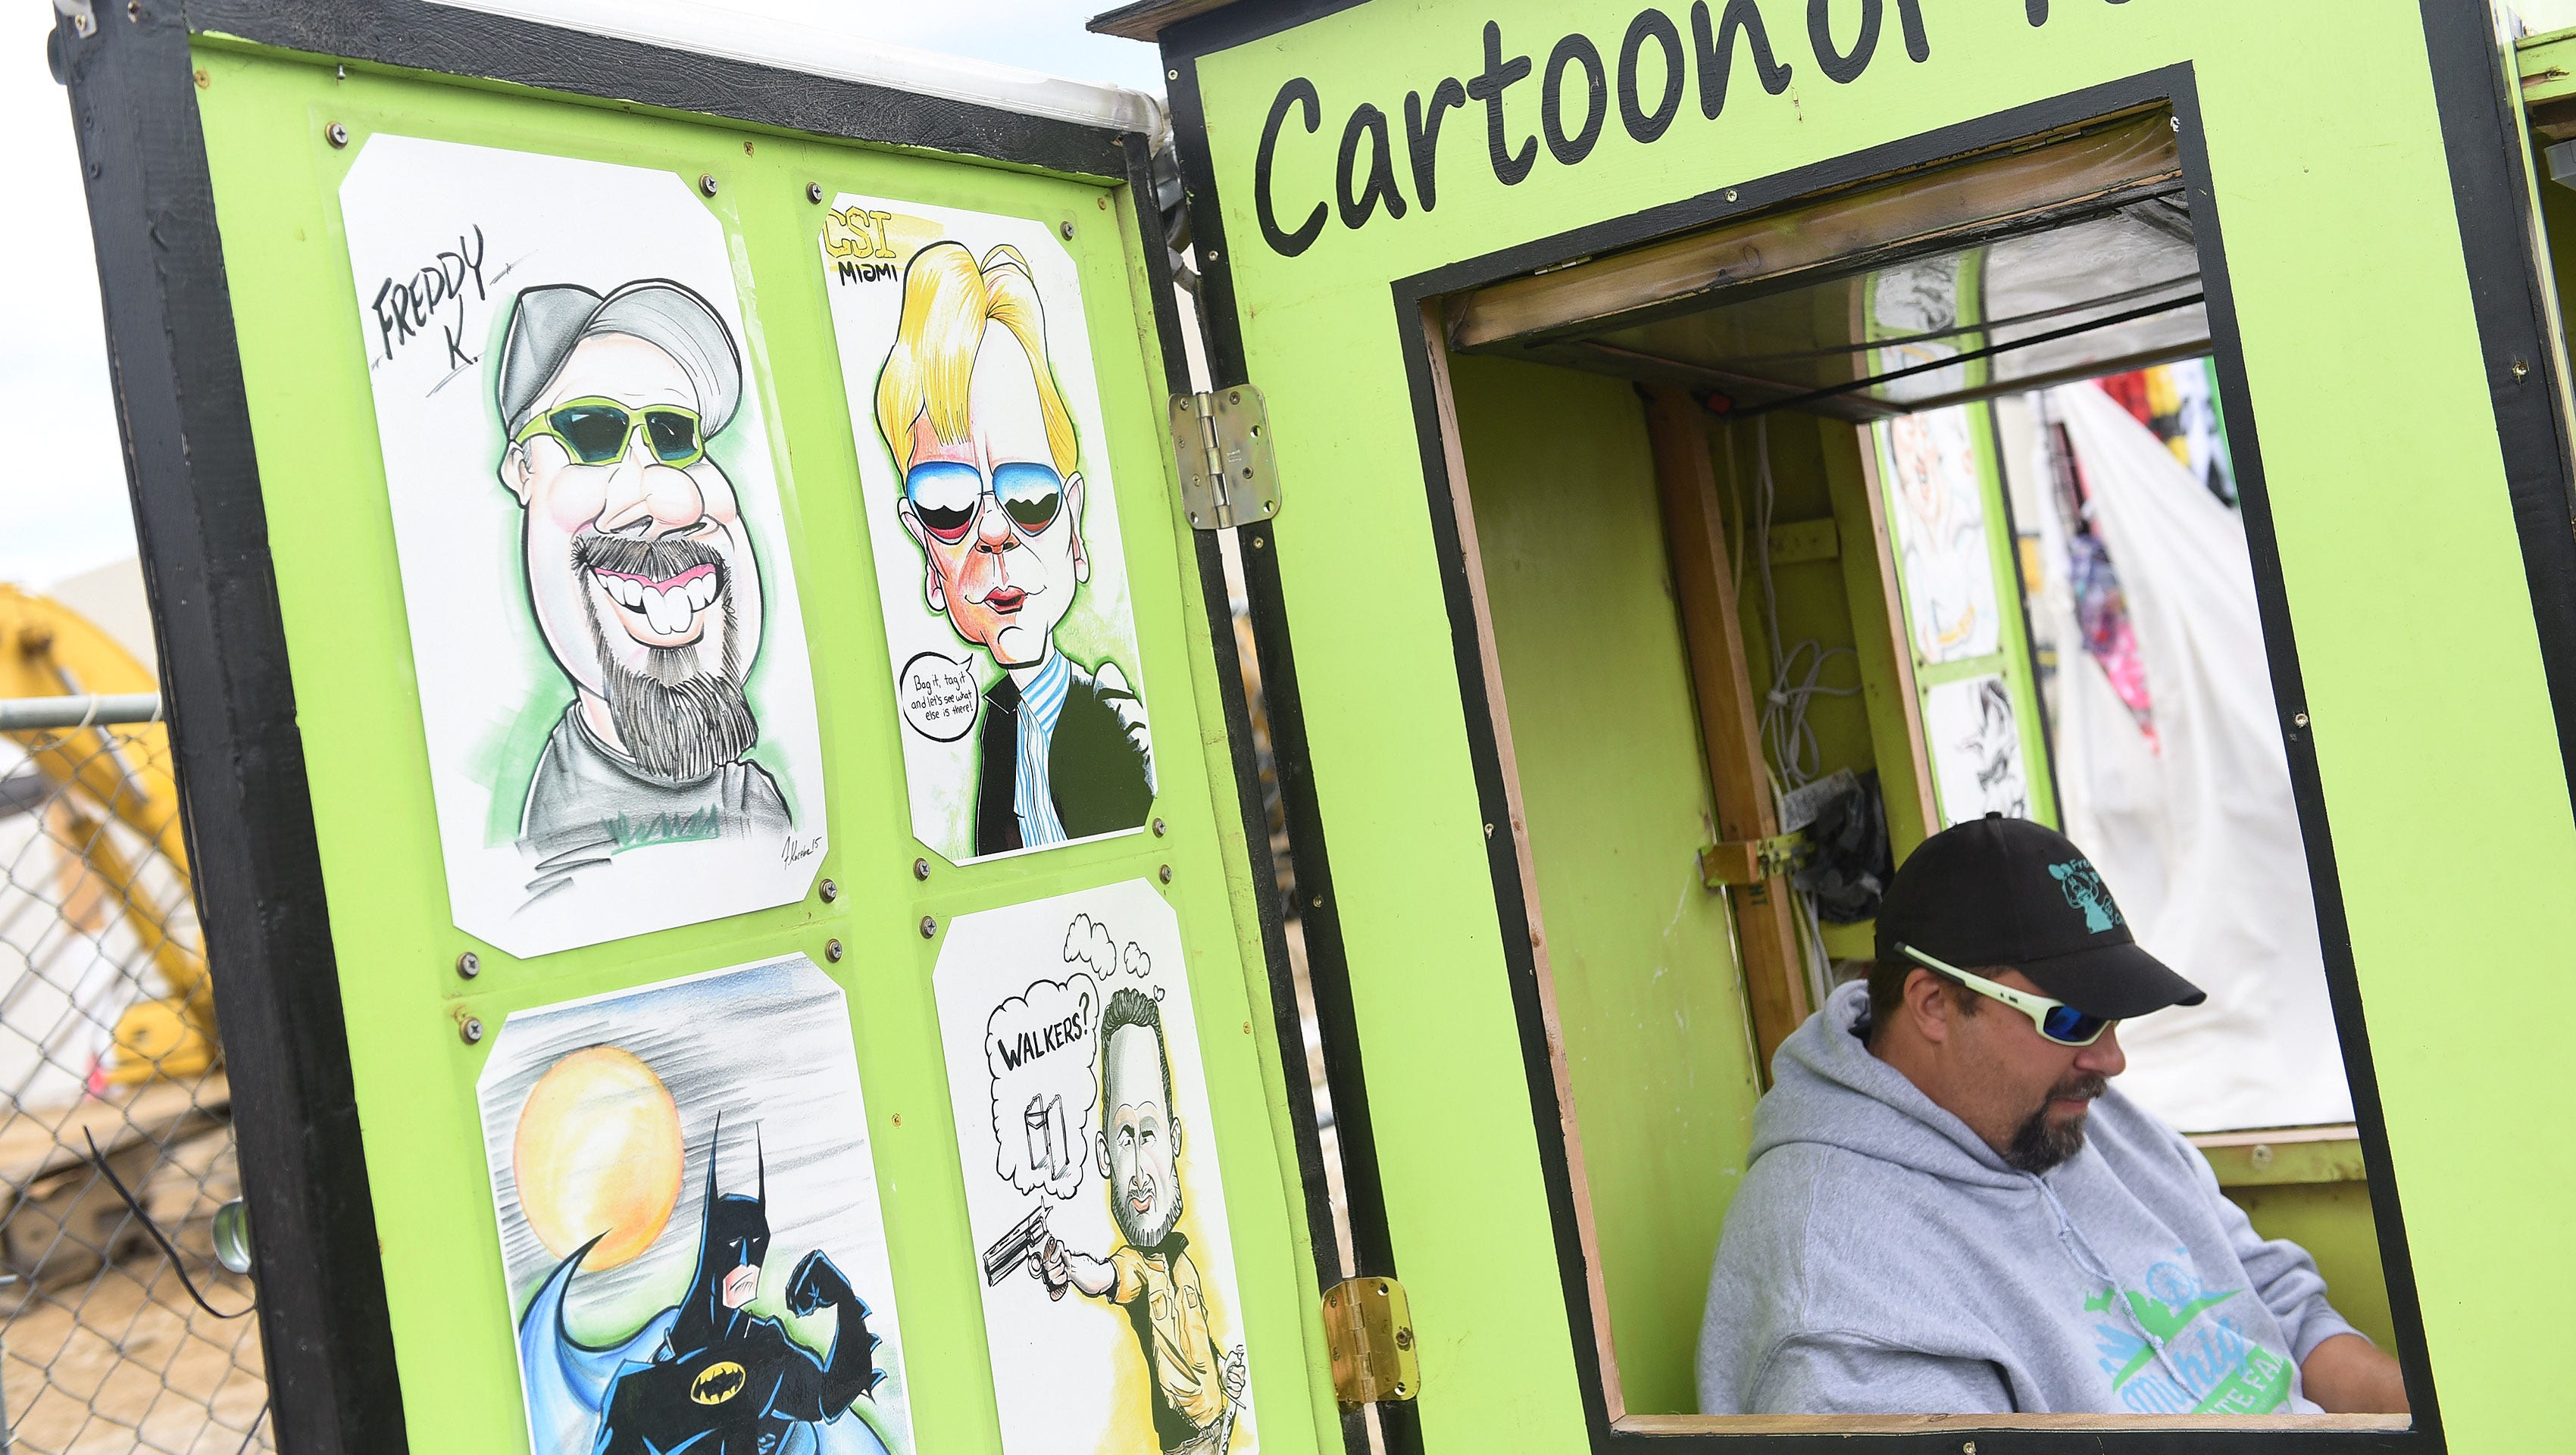 Freddy Koceba of Port Austin works on a caricature drawing at his booth.